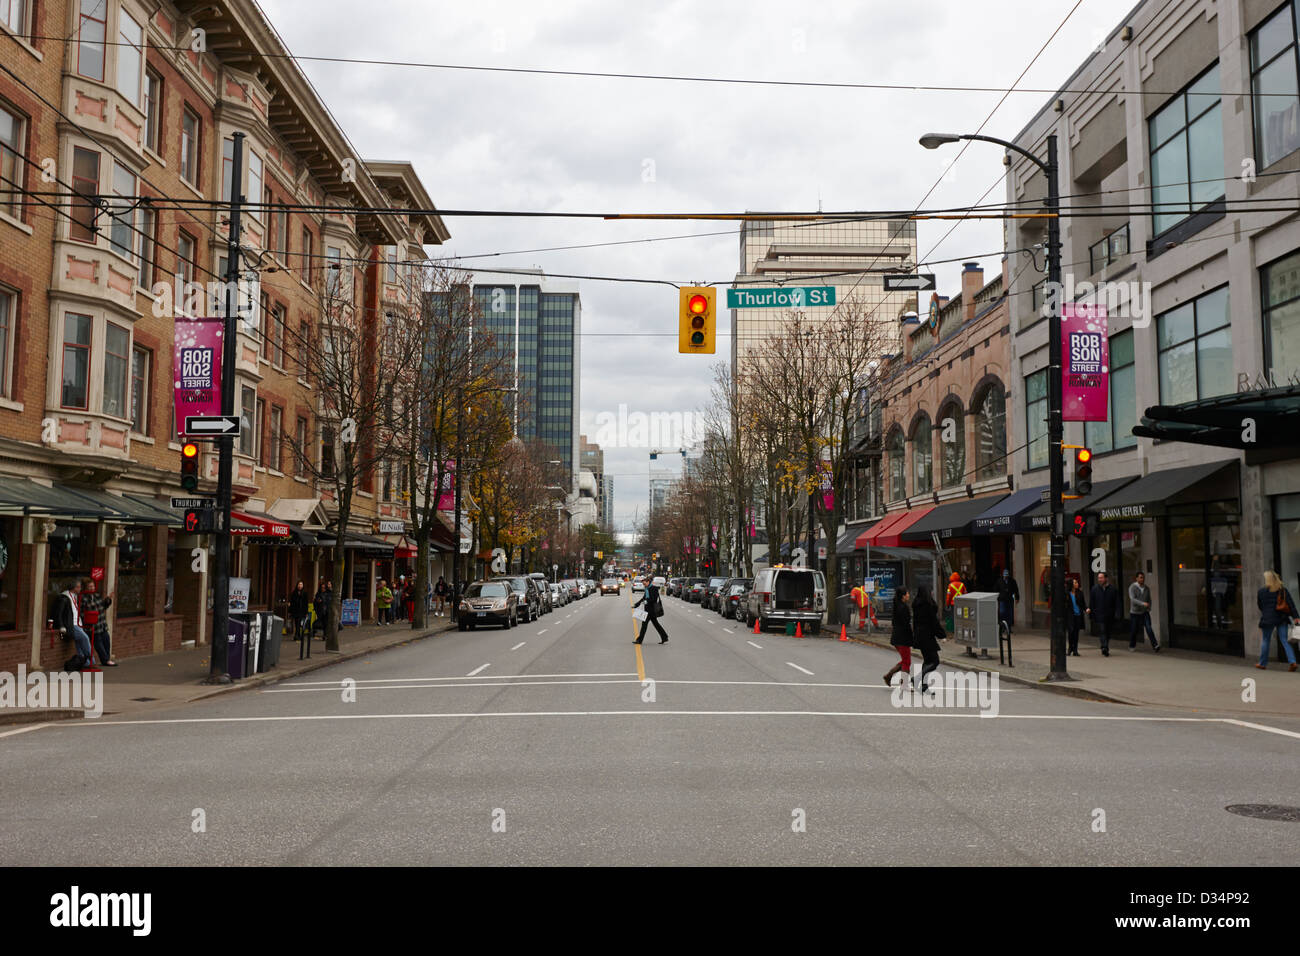 Robson Street in Vancouver - Main Shopping Mile in the City - VANCOUVER -  CANADA - APRIL 12, 2017 Editorial Image - Image of sightseeing, people:  93446555